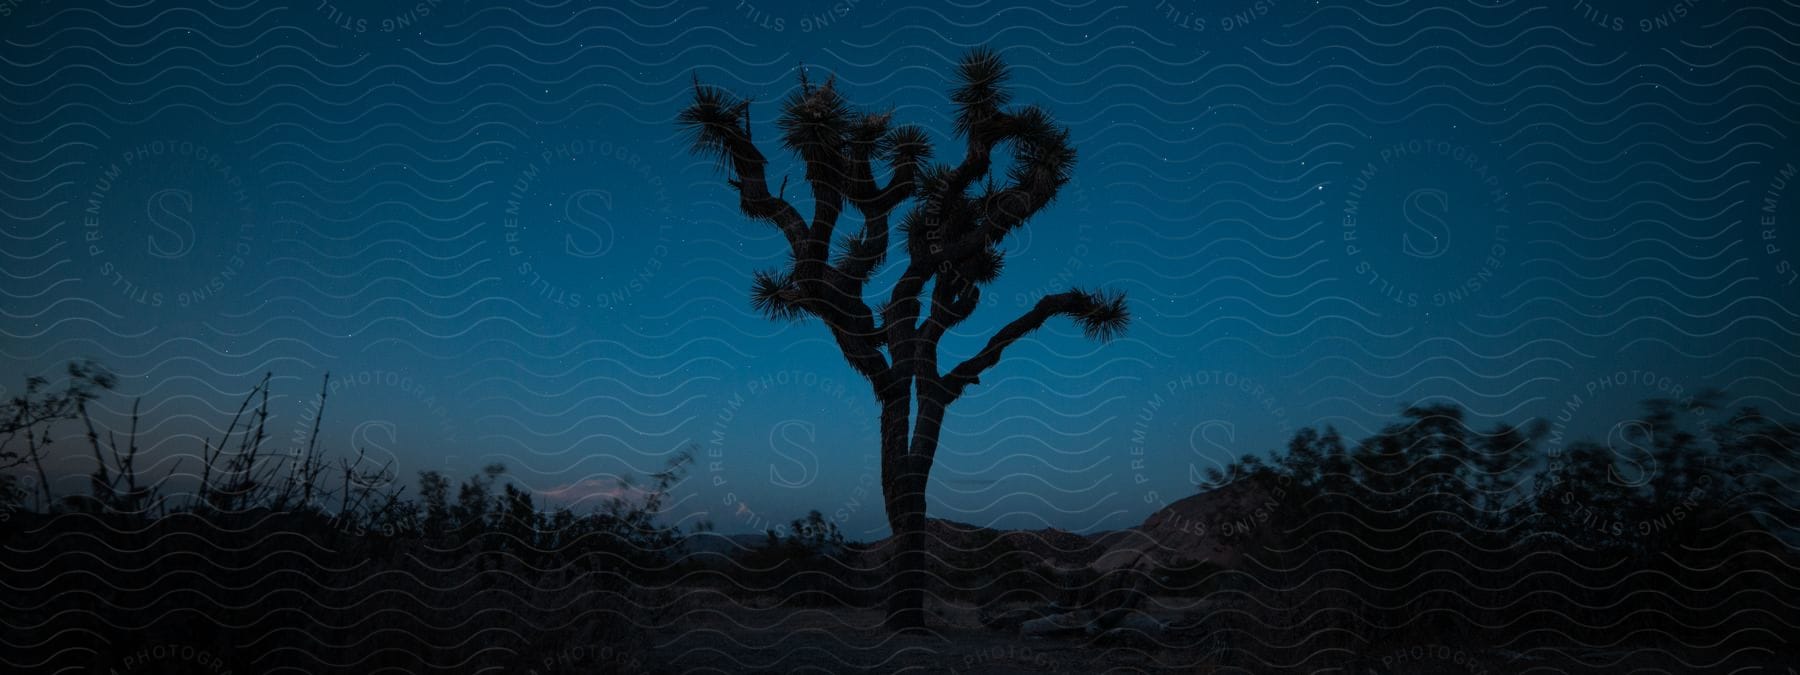 Trees and plants are silhouetted against the sky in joshua tree national park